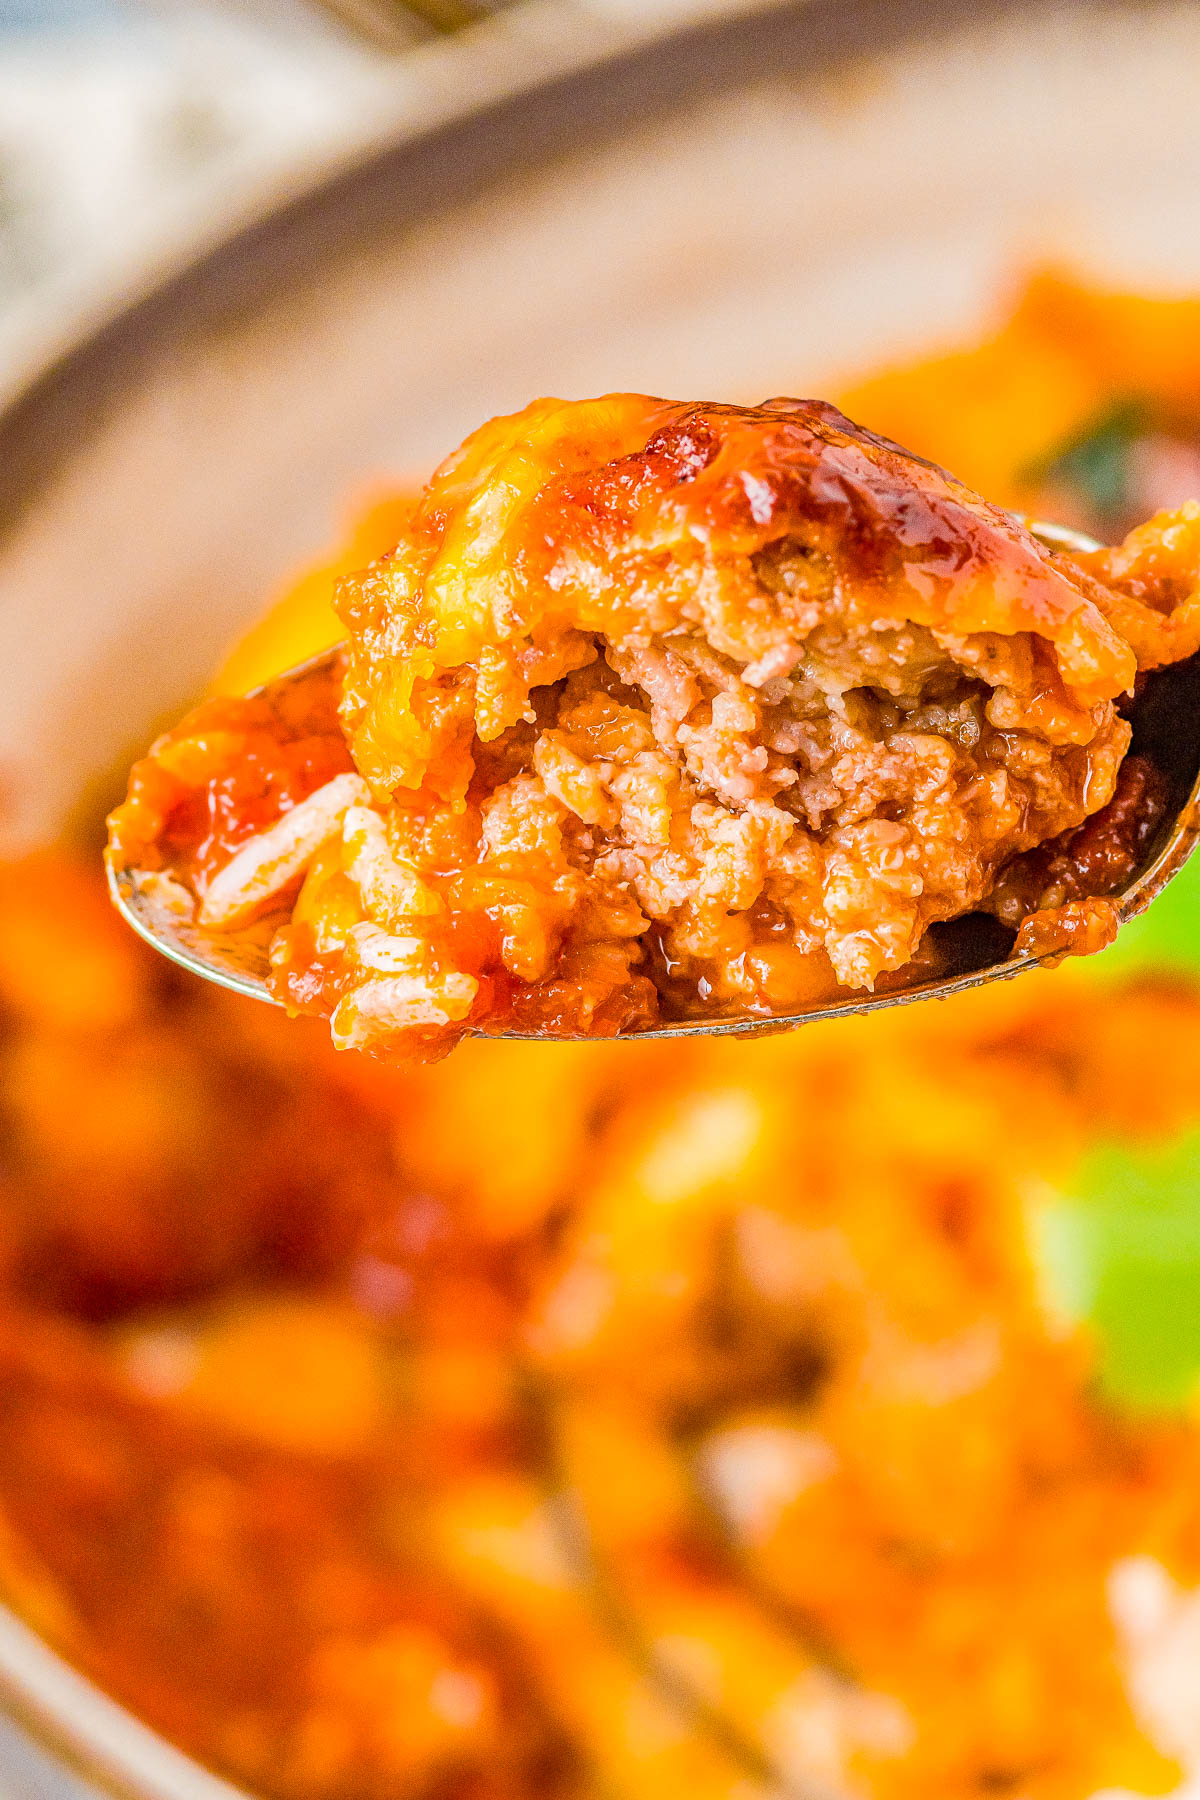 Tex Mex Meatballs - Tender, juicy homemade beef and pork meatballs with just the right amount of spicy kick! Simmered in chipotle enchilada sauce and smothered with melted cheese, this EASY meatball recipe will become a weeknight family dinner favorite. Or make them as a game day or party appetizer recipe!